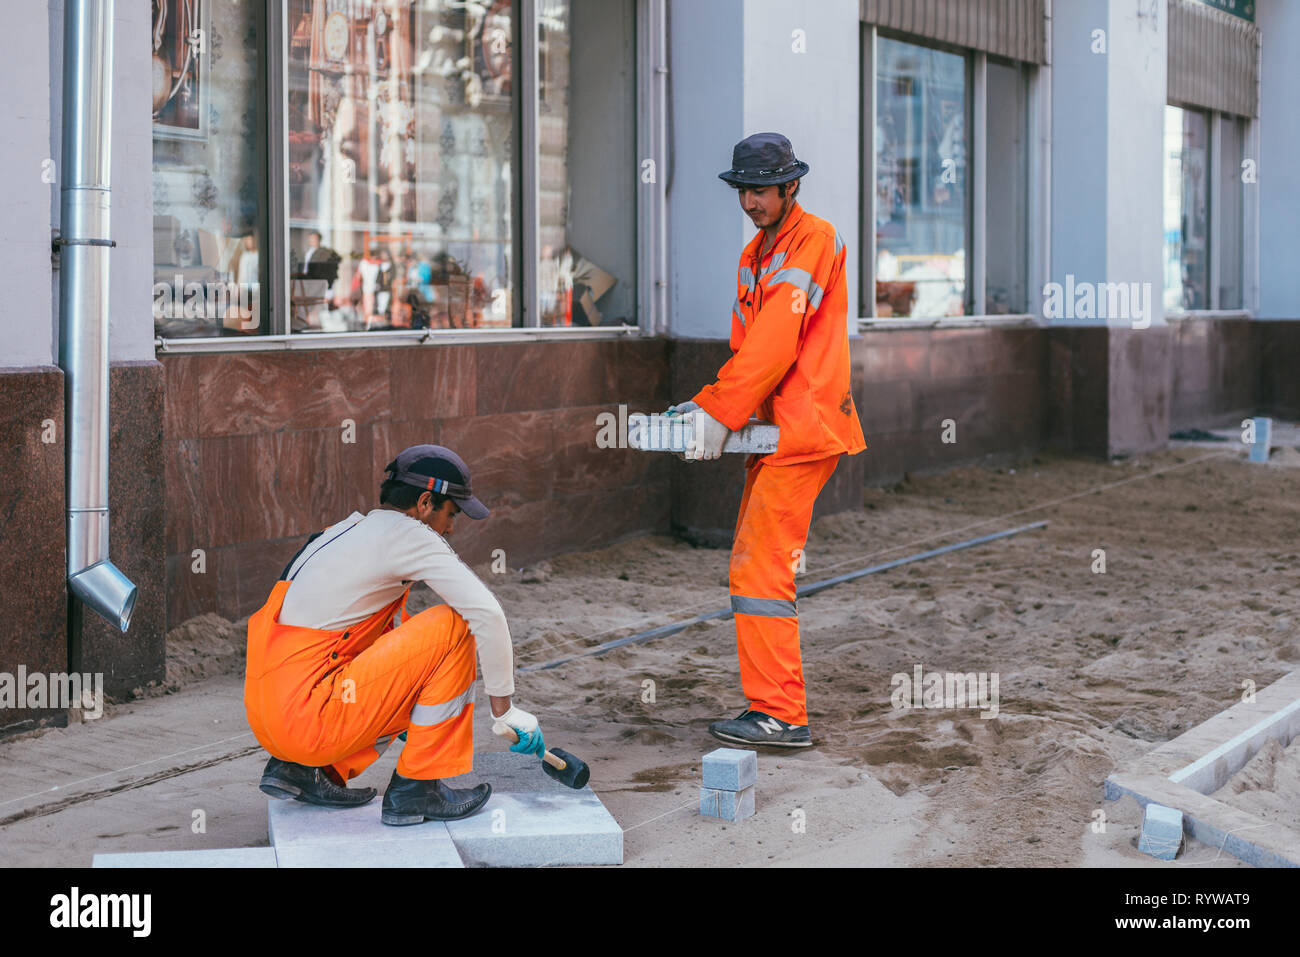 Moscow, Russia - August 14, 2015: builderworkers laid a new tile on the Pavement. Reconstruction of pavement tiles in the capital near palace Chertkov Stock Photo